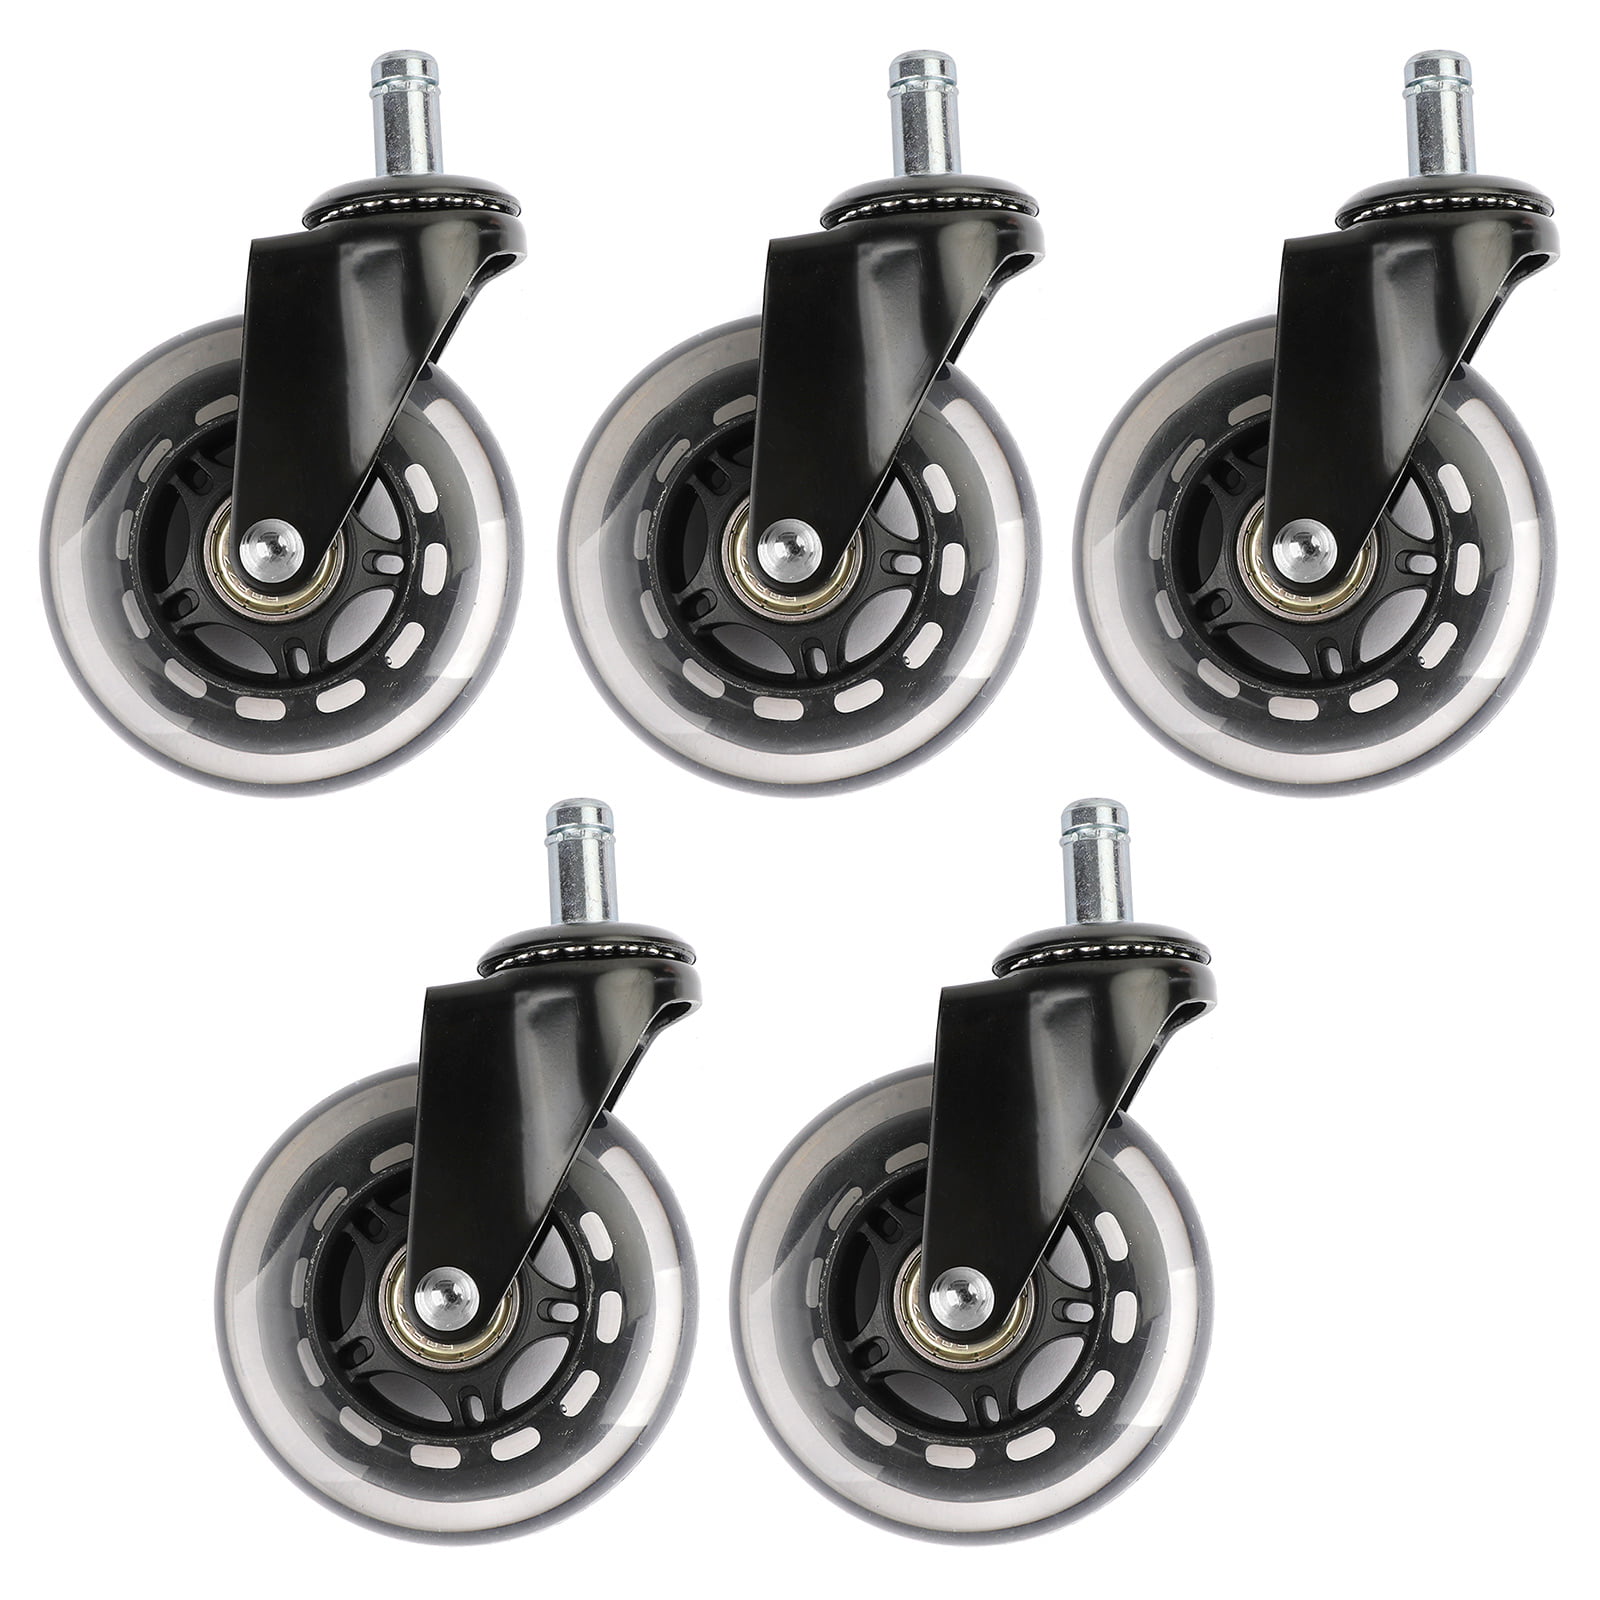 Swivel Roller Caster Wheel Bearing Office Home Furniture Chair Smooth Moving